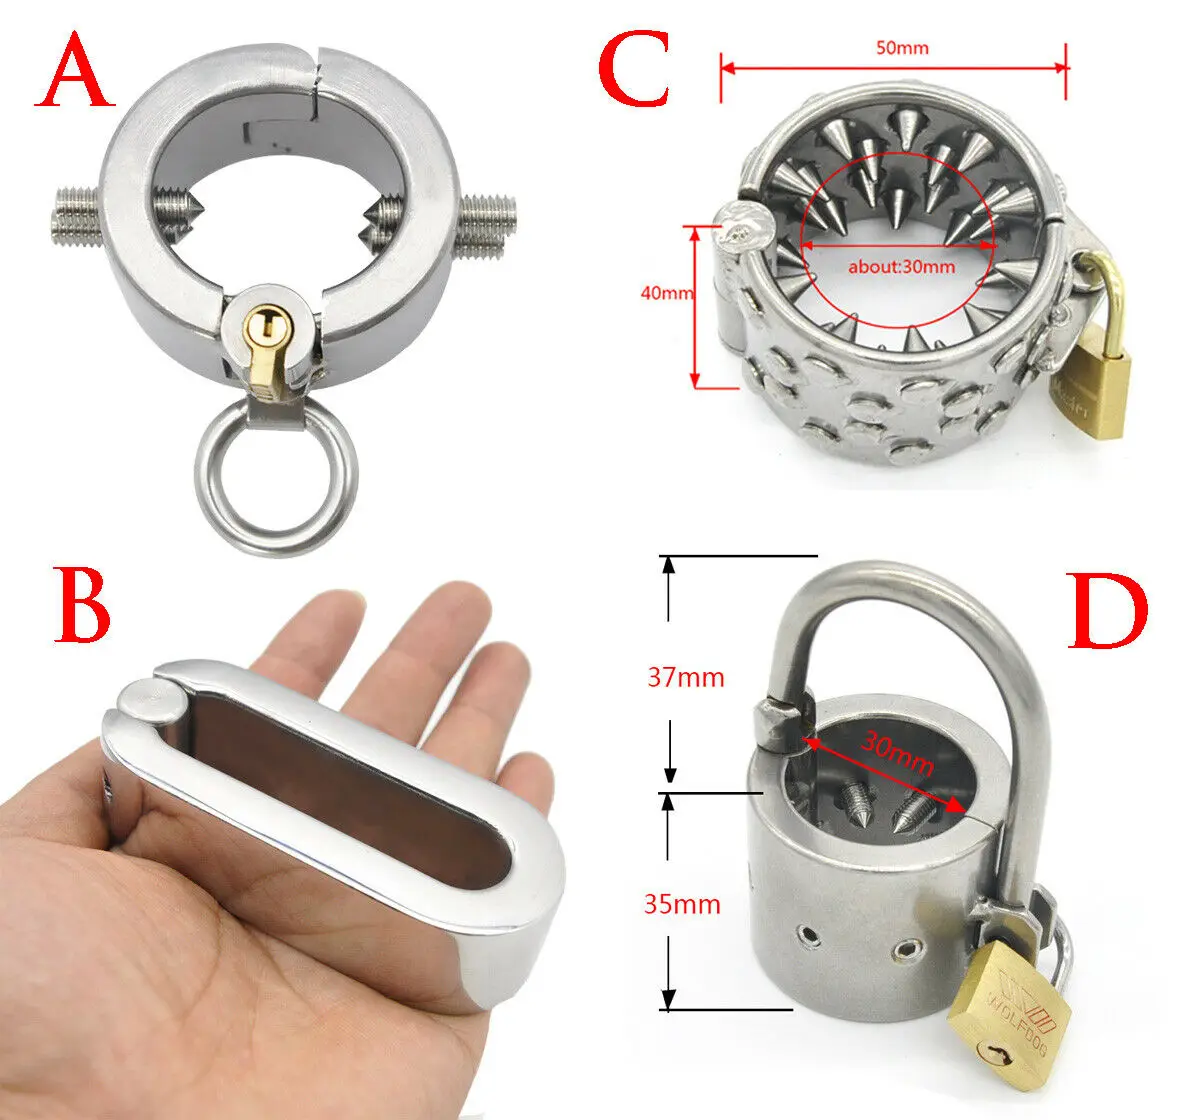 

Heavy Duty Stainless Steel Male Ball Stretcher Chastity Cock Penis Ring Enhancer Testicle Scrotum Lock BDSM Bondage Sex Toys Men